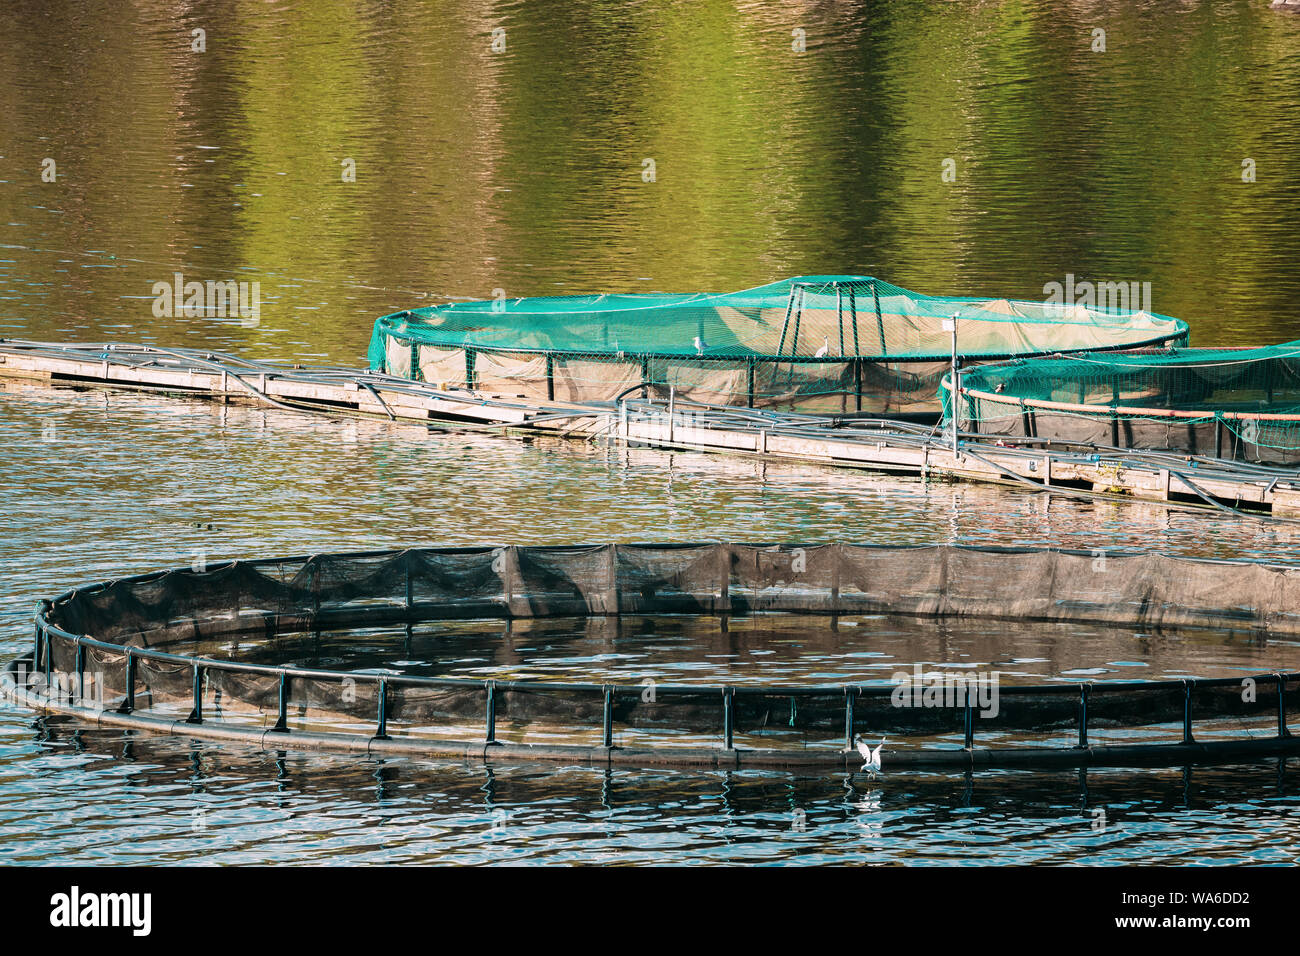 Fisheries, Fish Farm In Summer Lake Or River In Beautiful Summer Sunny Day. Swedish Nature, Sweden. Stock Photo